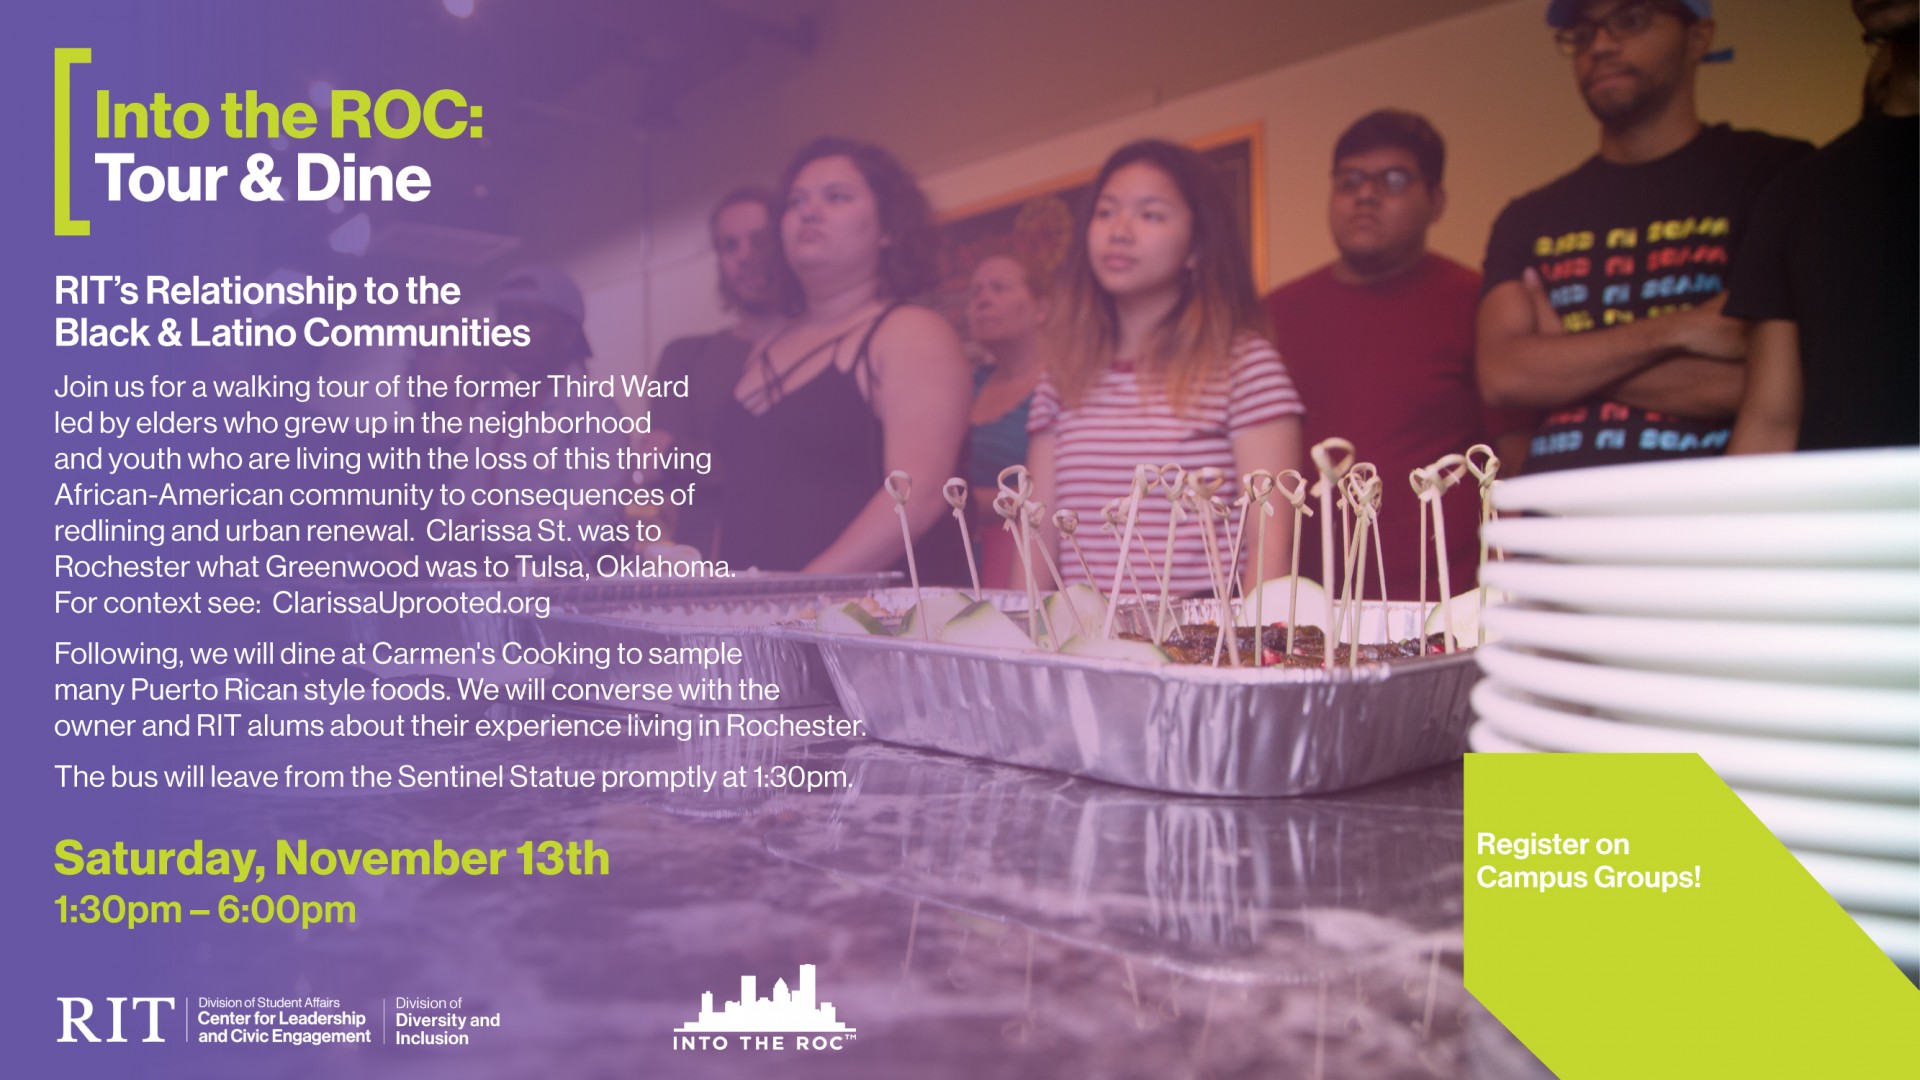 In the background, a group of students stands attentively listening to a community member. In front of them on a table is a tray of food with decorative toothpicks sticking out. To the left of the image on a purple background is the information about the event. Along the bottom of the image are the logos of sponsoring groups. In the bottom right of the image, on a green background, is a note to register on Campus Groups.